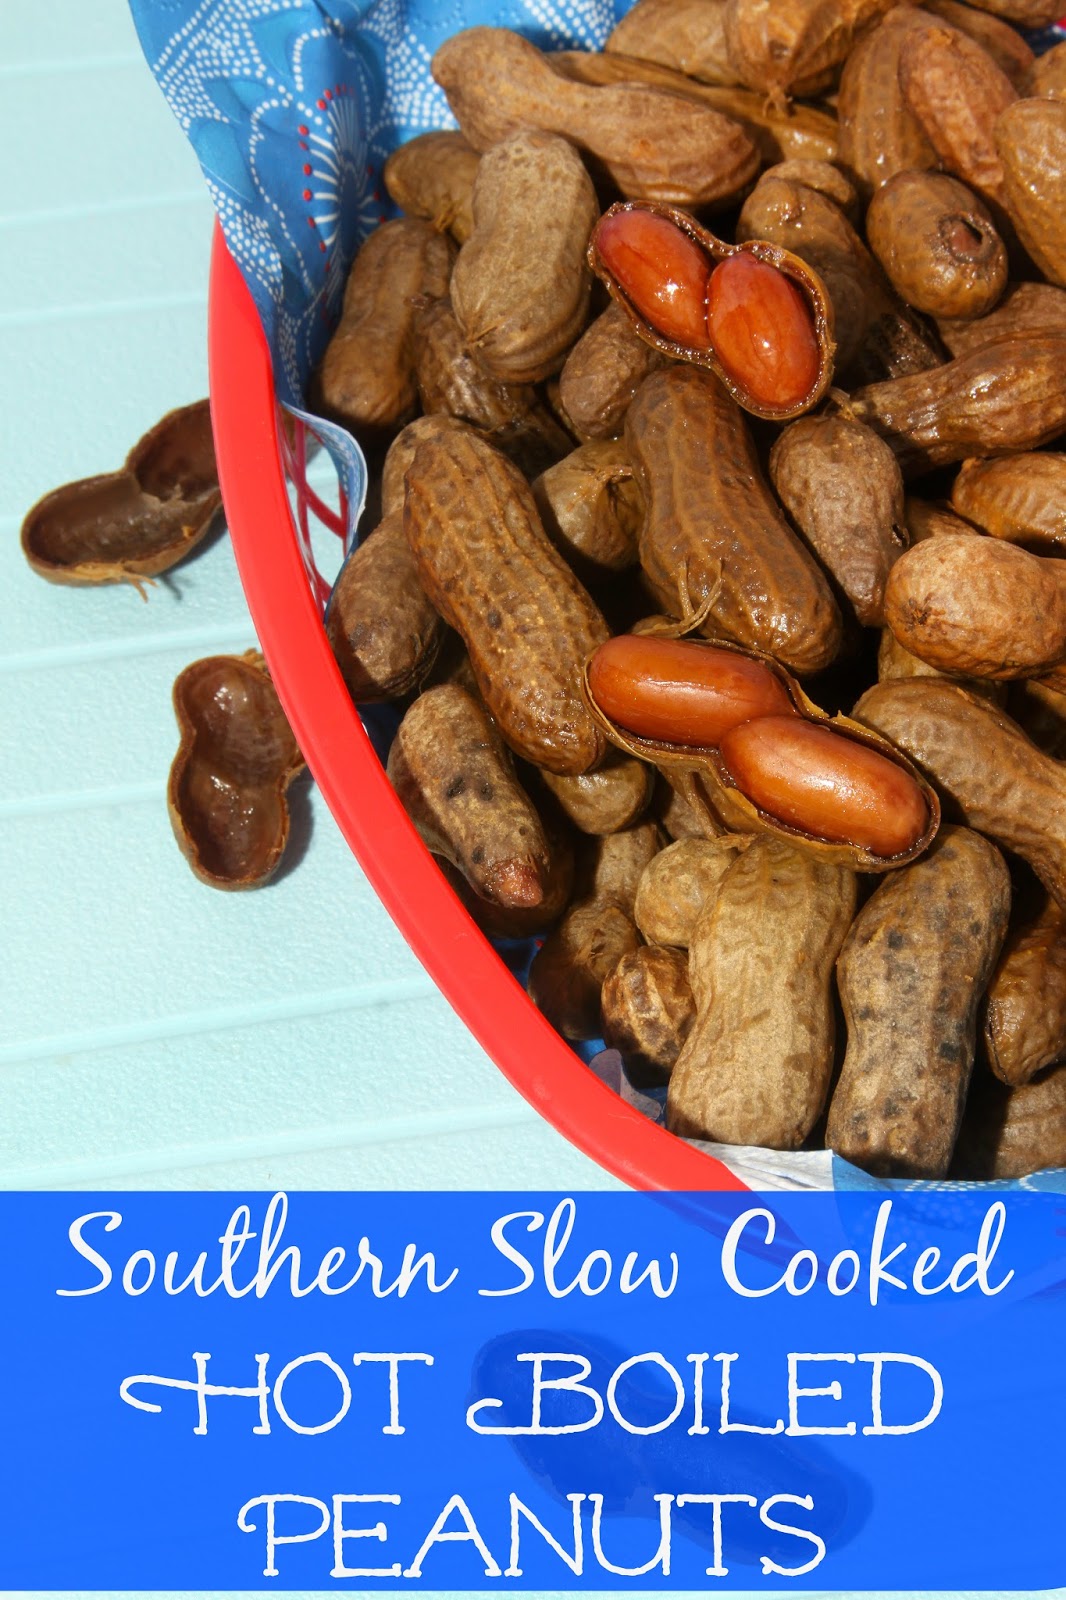 Southern Slow Cooked Hot Boiled Peanuts - For the Love of Food